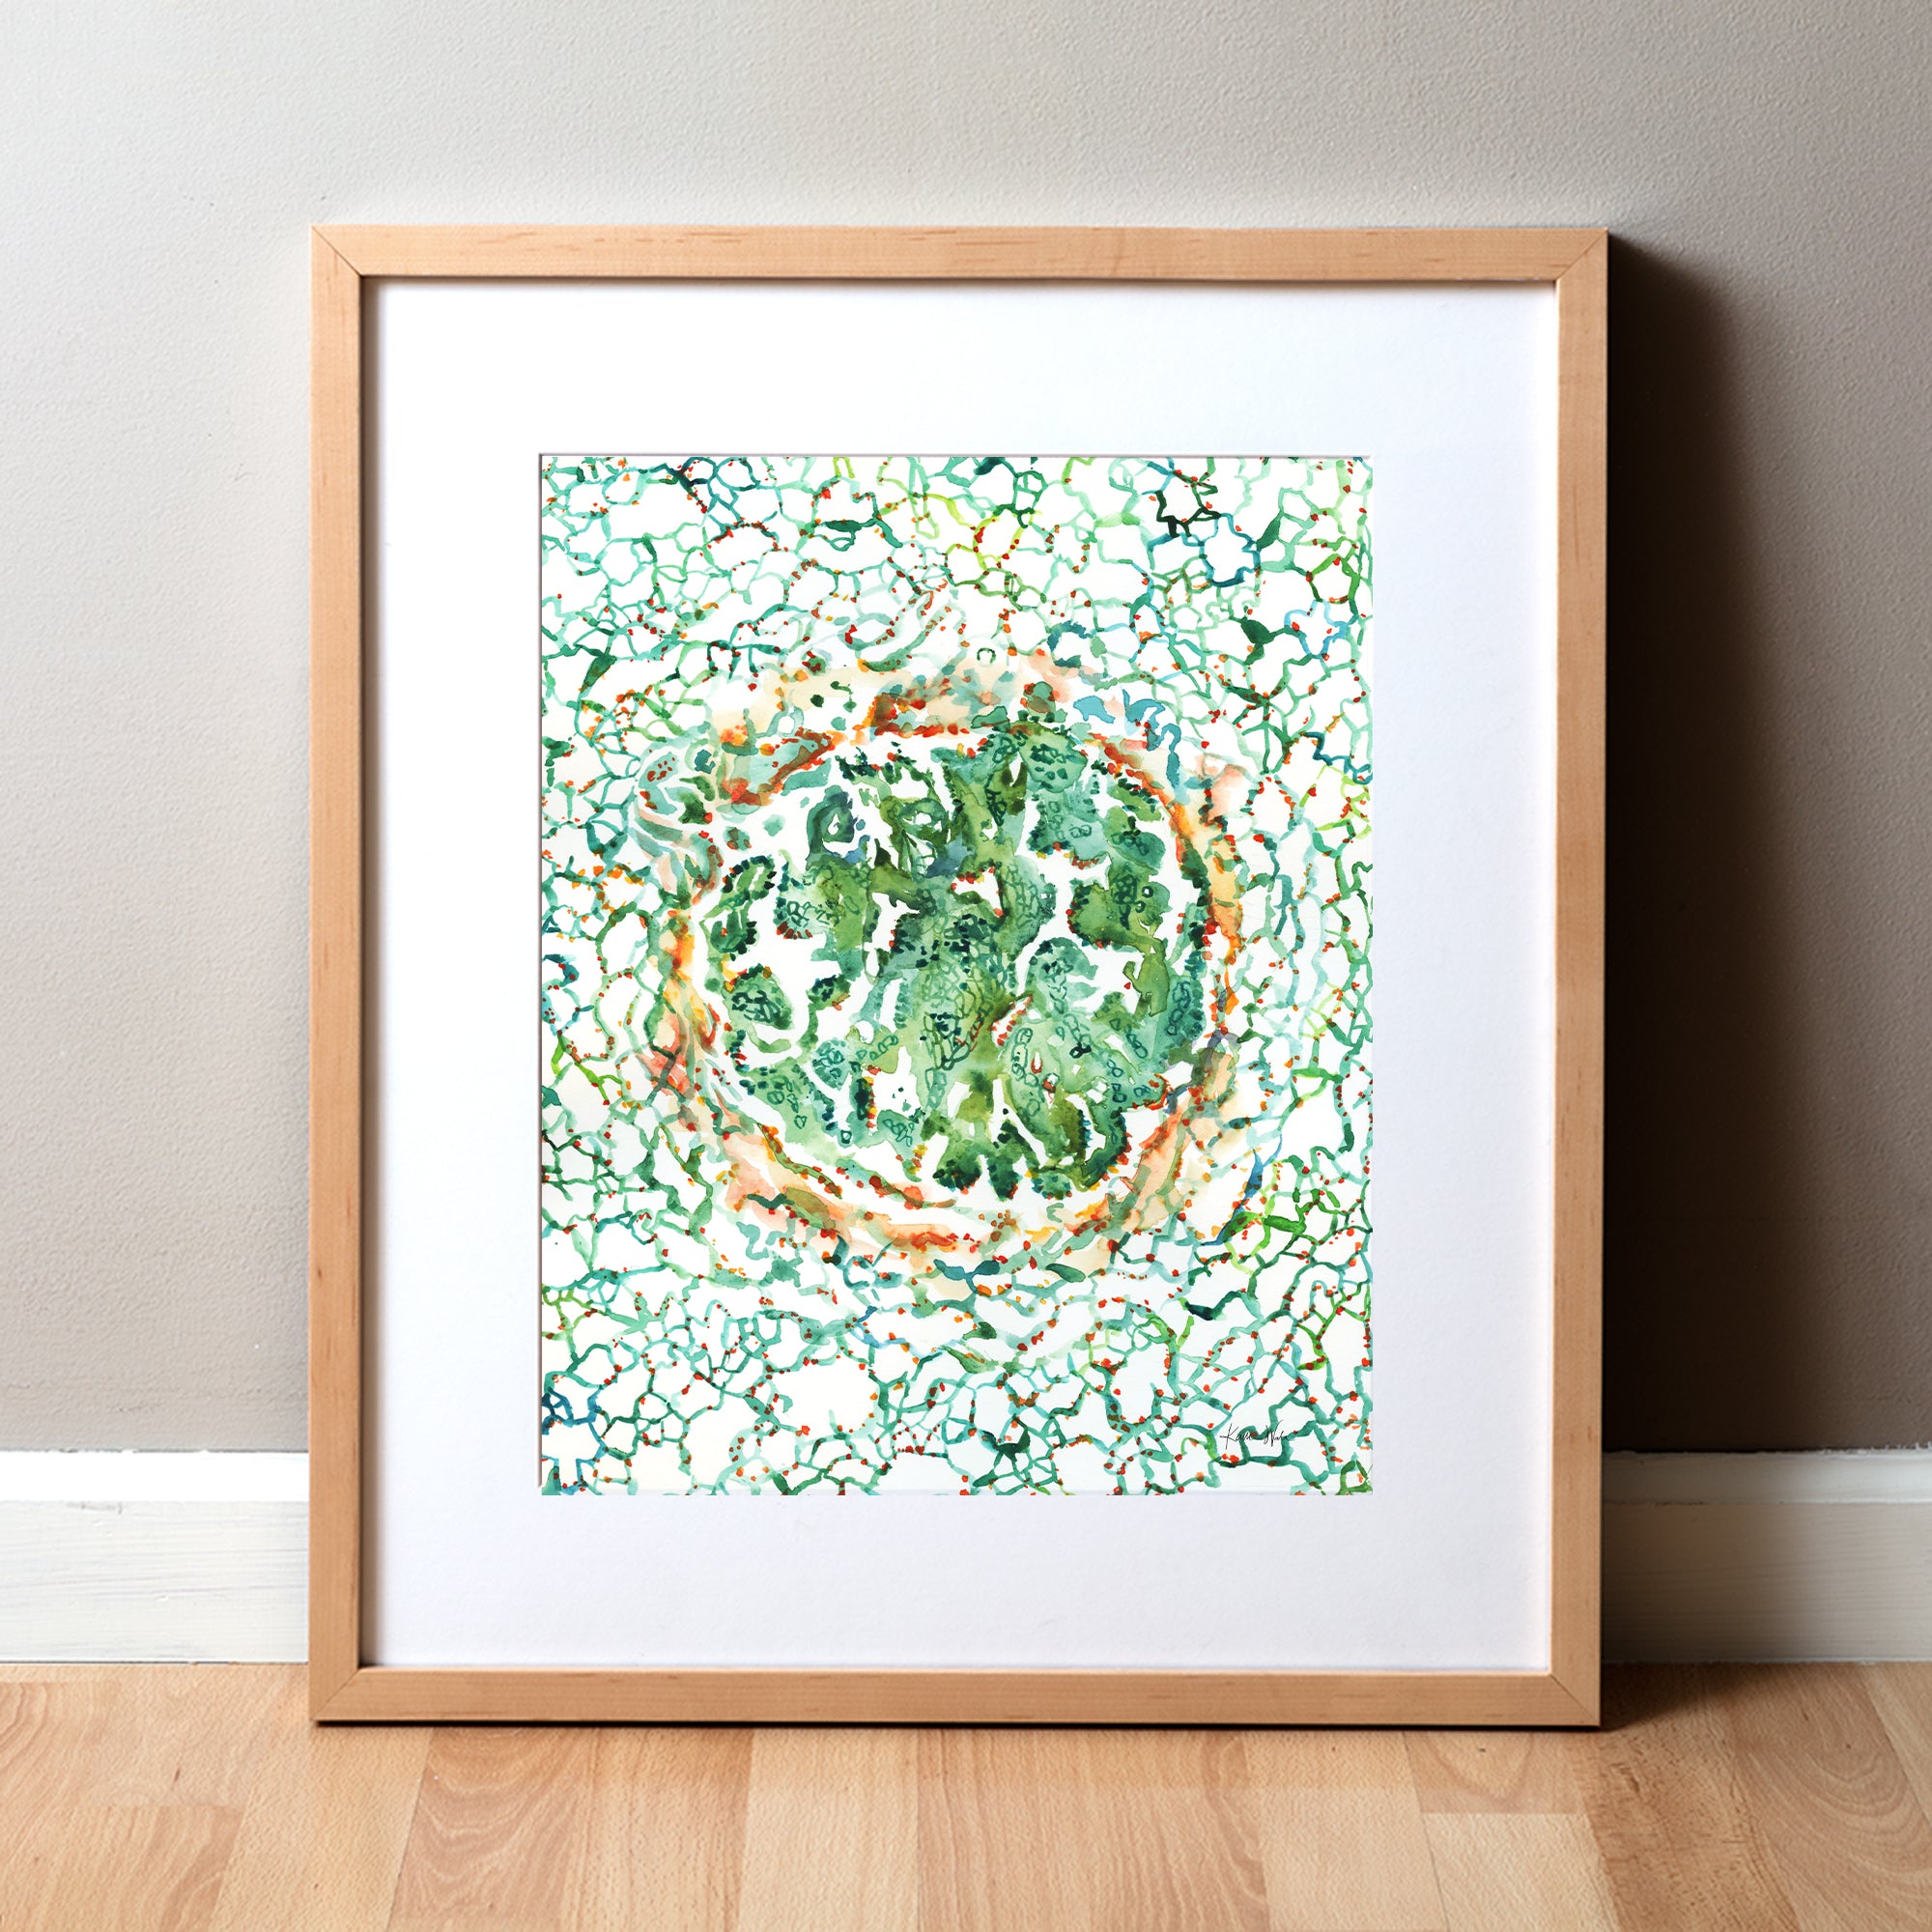 Framed watercolor painting of adenocarcinoma, with greens, reds, and yellows.